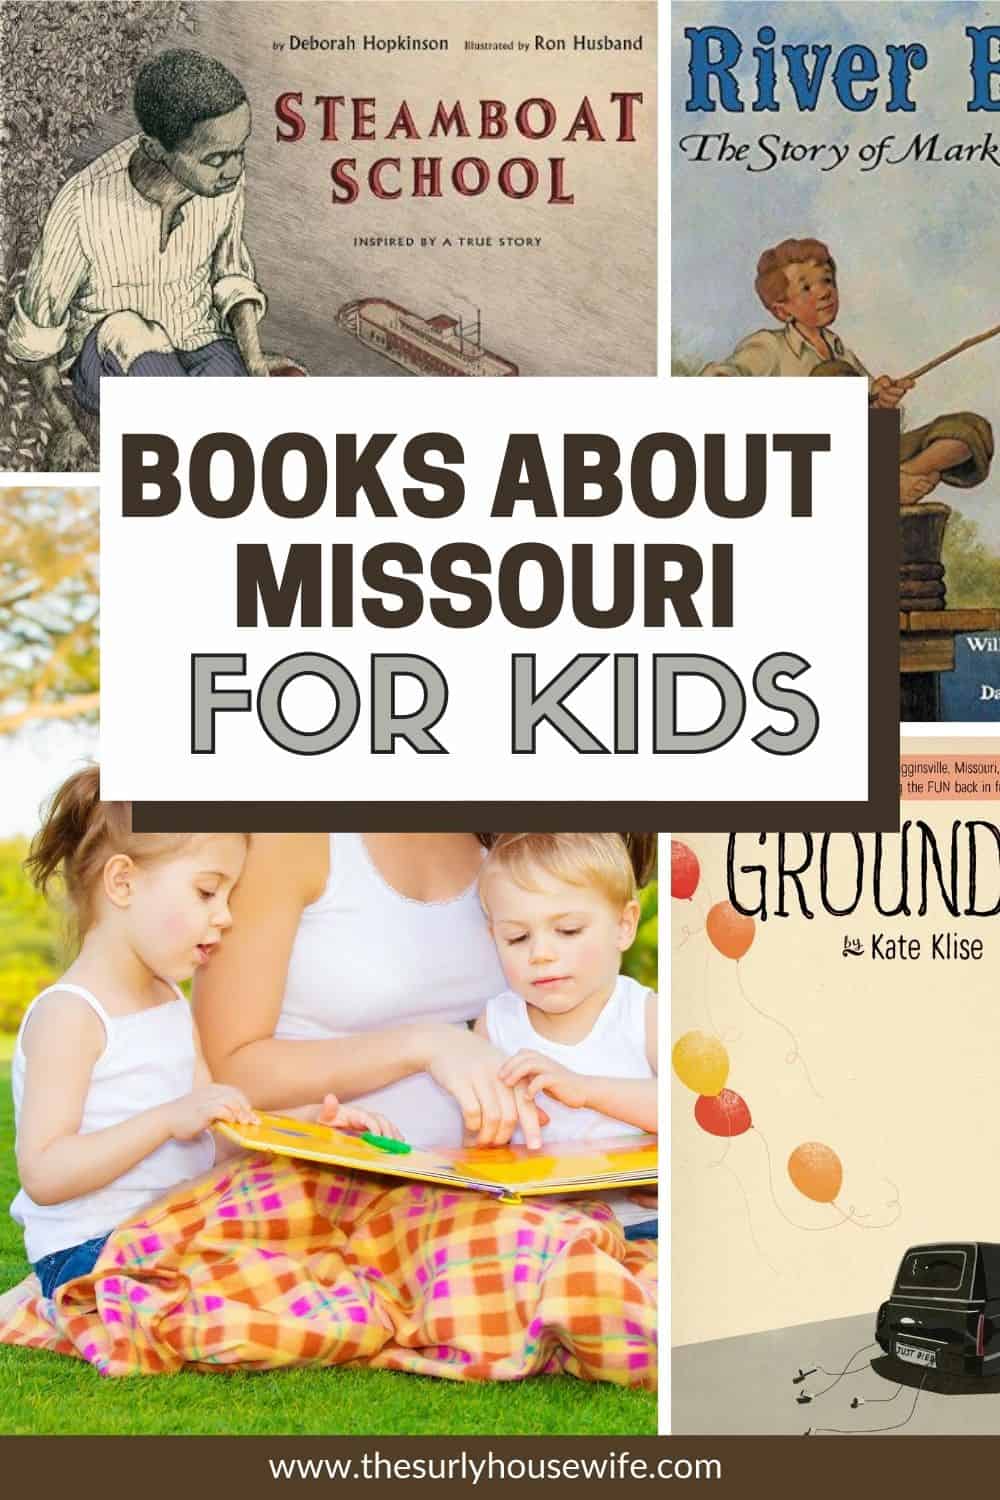 If you are studying Missouri with your kids, check out this post for picture and chapter books about Missouri they will love!